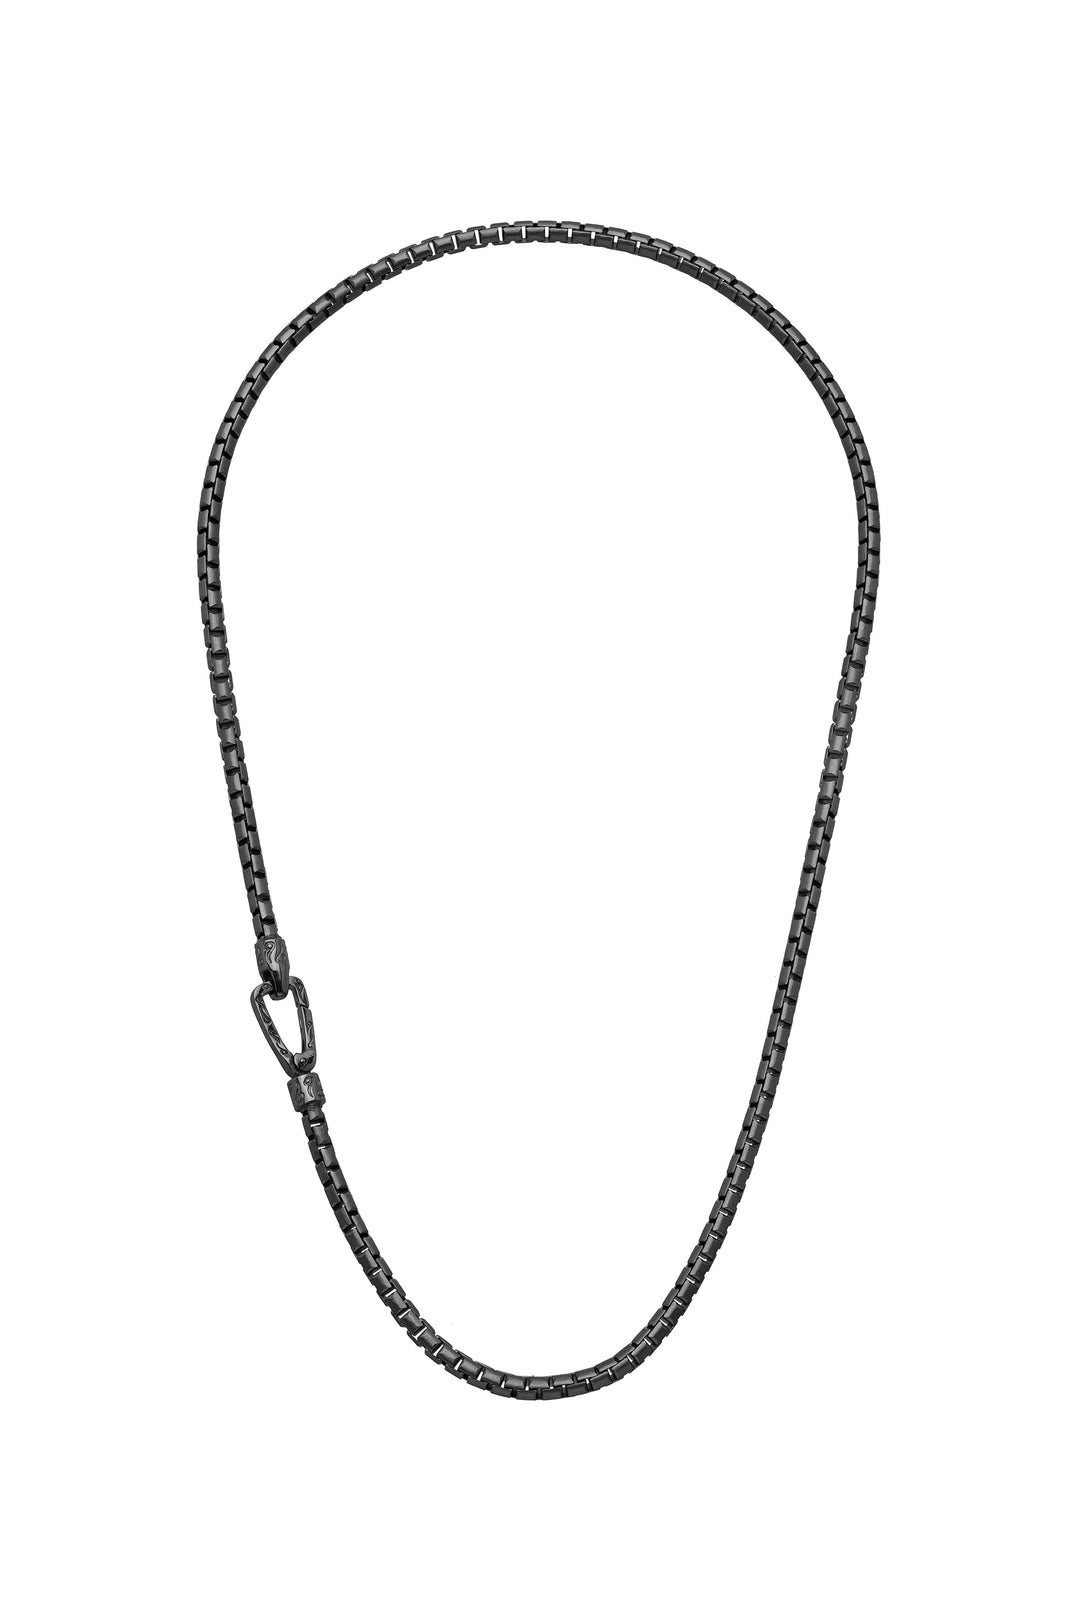 ULYSSES Tubular Burnished Silver Necklace with matte chain and polished clasp